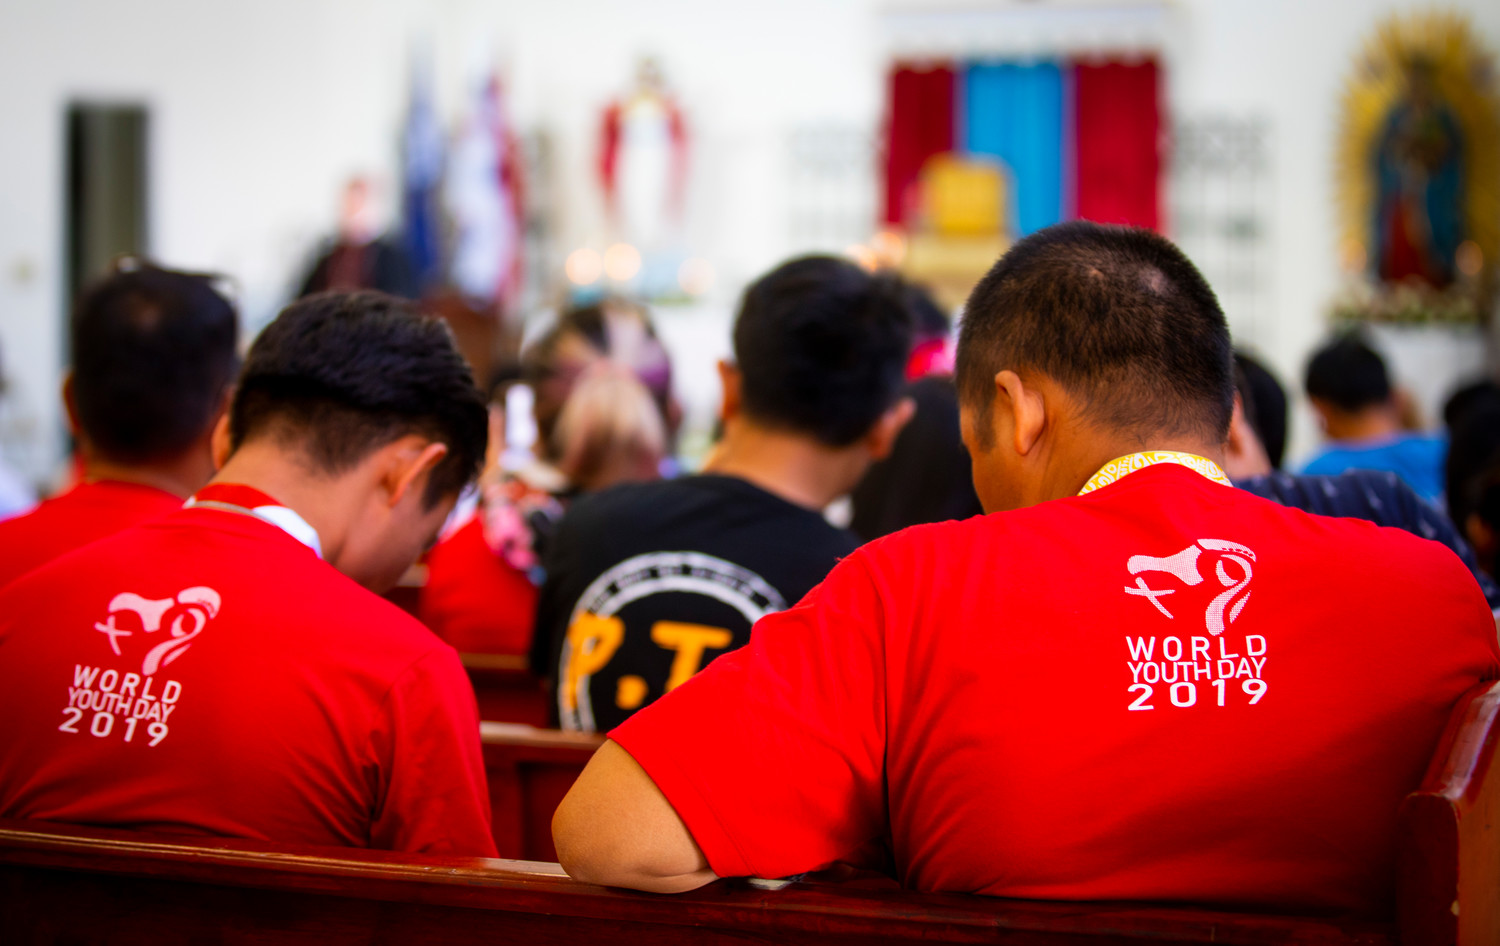 World Youth Day pilgrims bow their heads in pray during a catechesis session lead by Chicago Cardinal Blase J. Cupich at the Parish of Our Mother of Perpetual Help in Panama City Jan. 25, 2019.